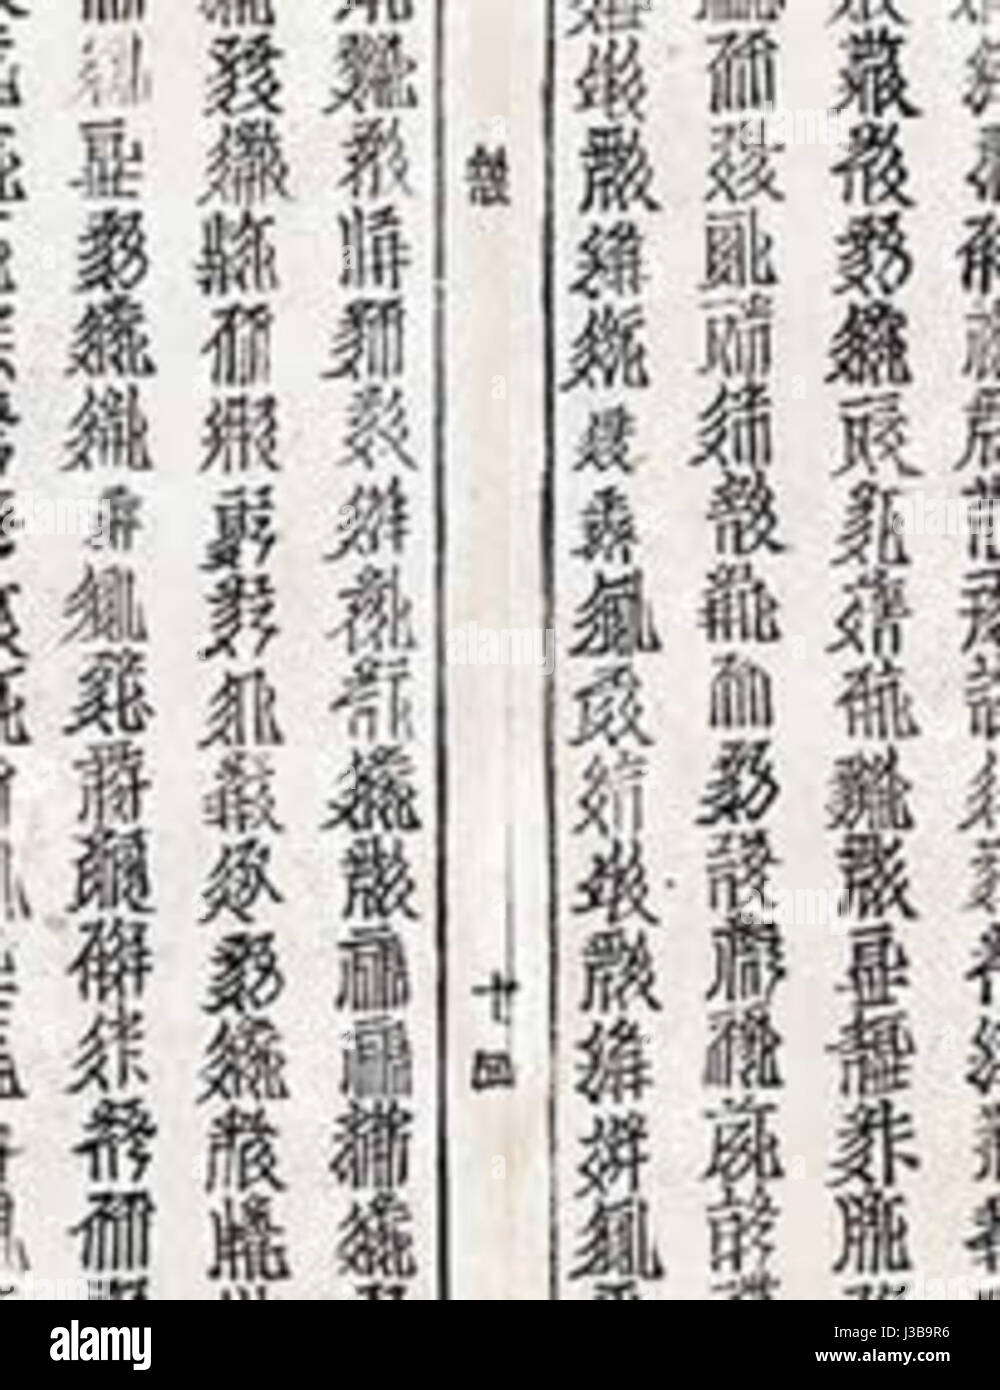 Detail of Tangut text with inverted character Stock Photo